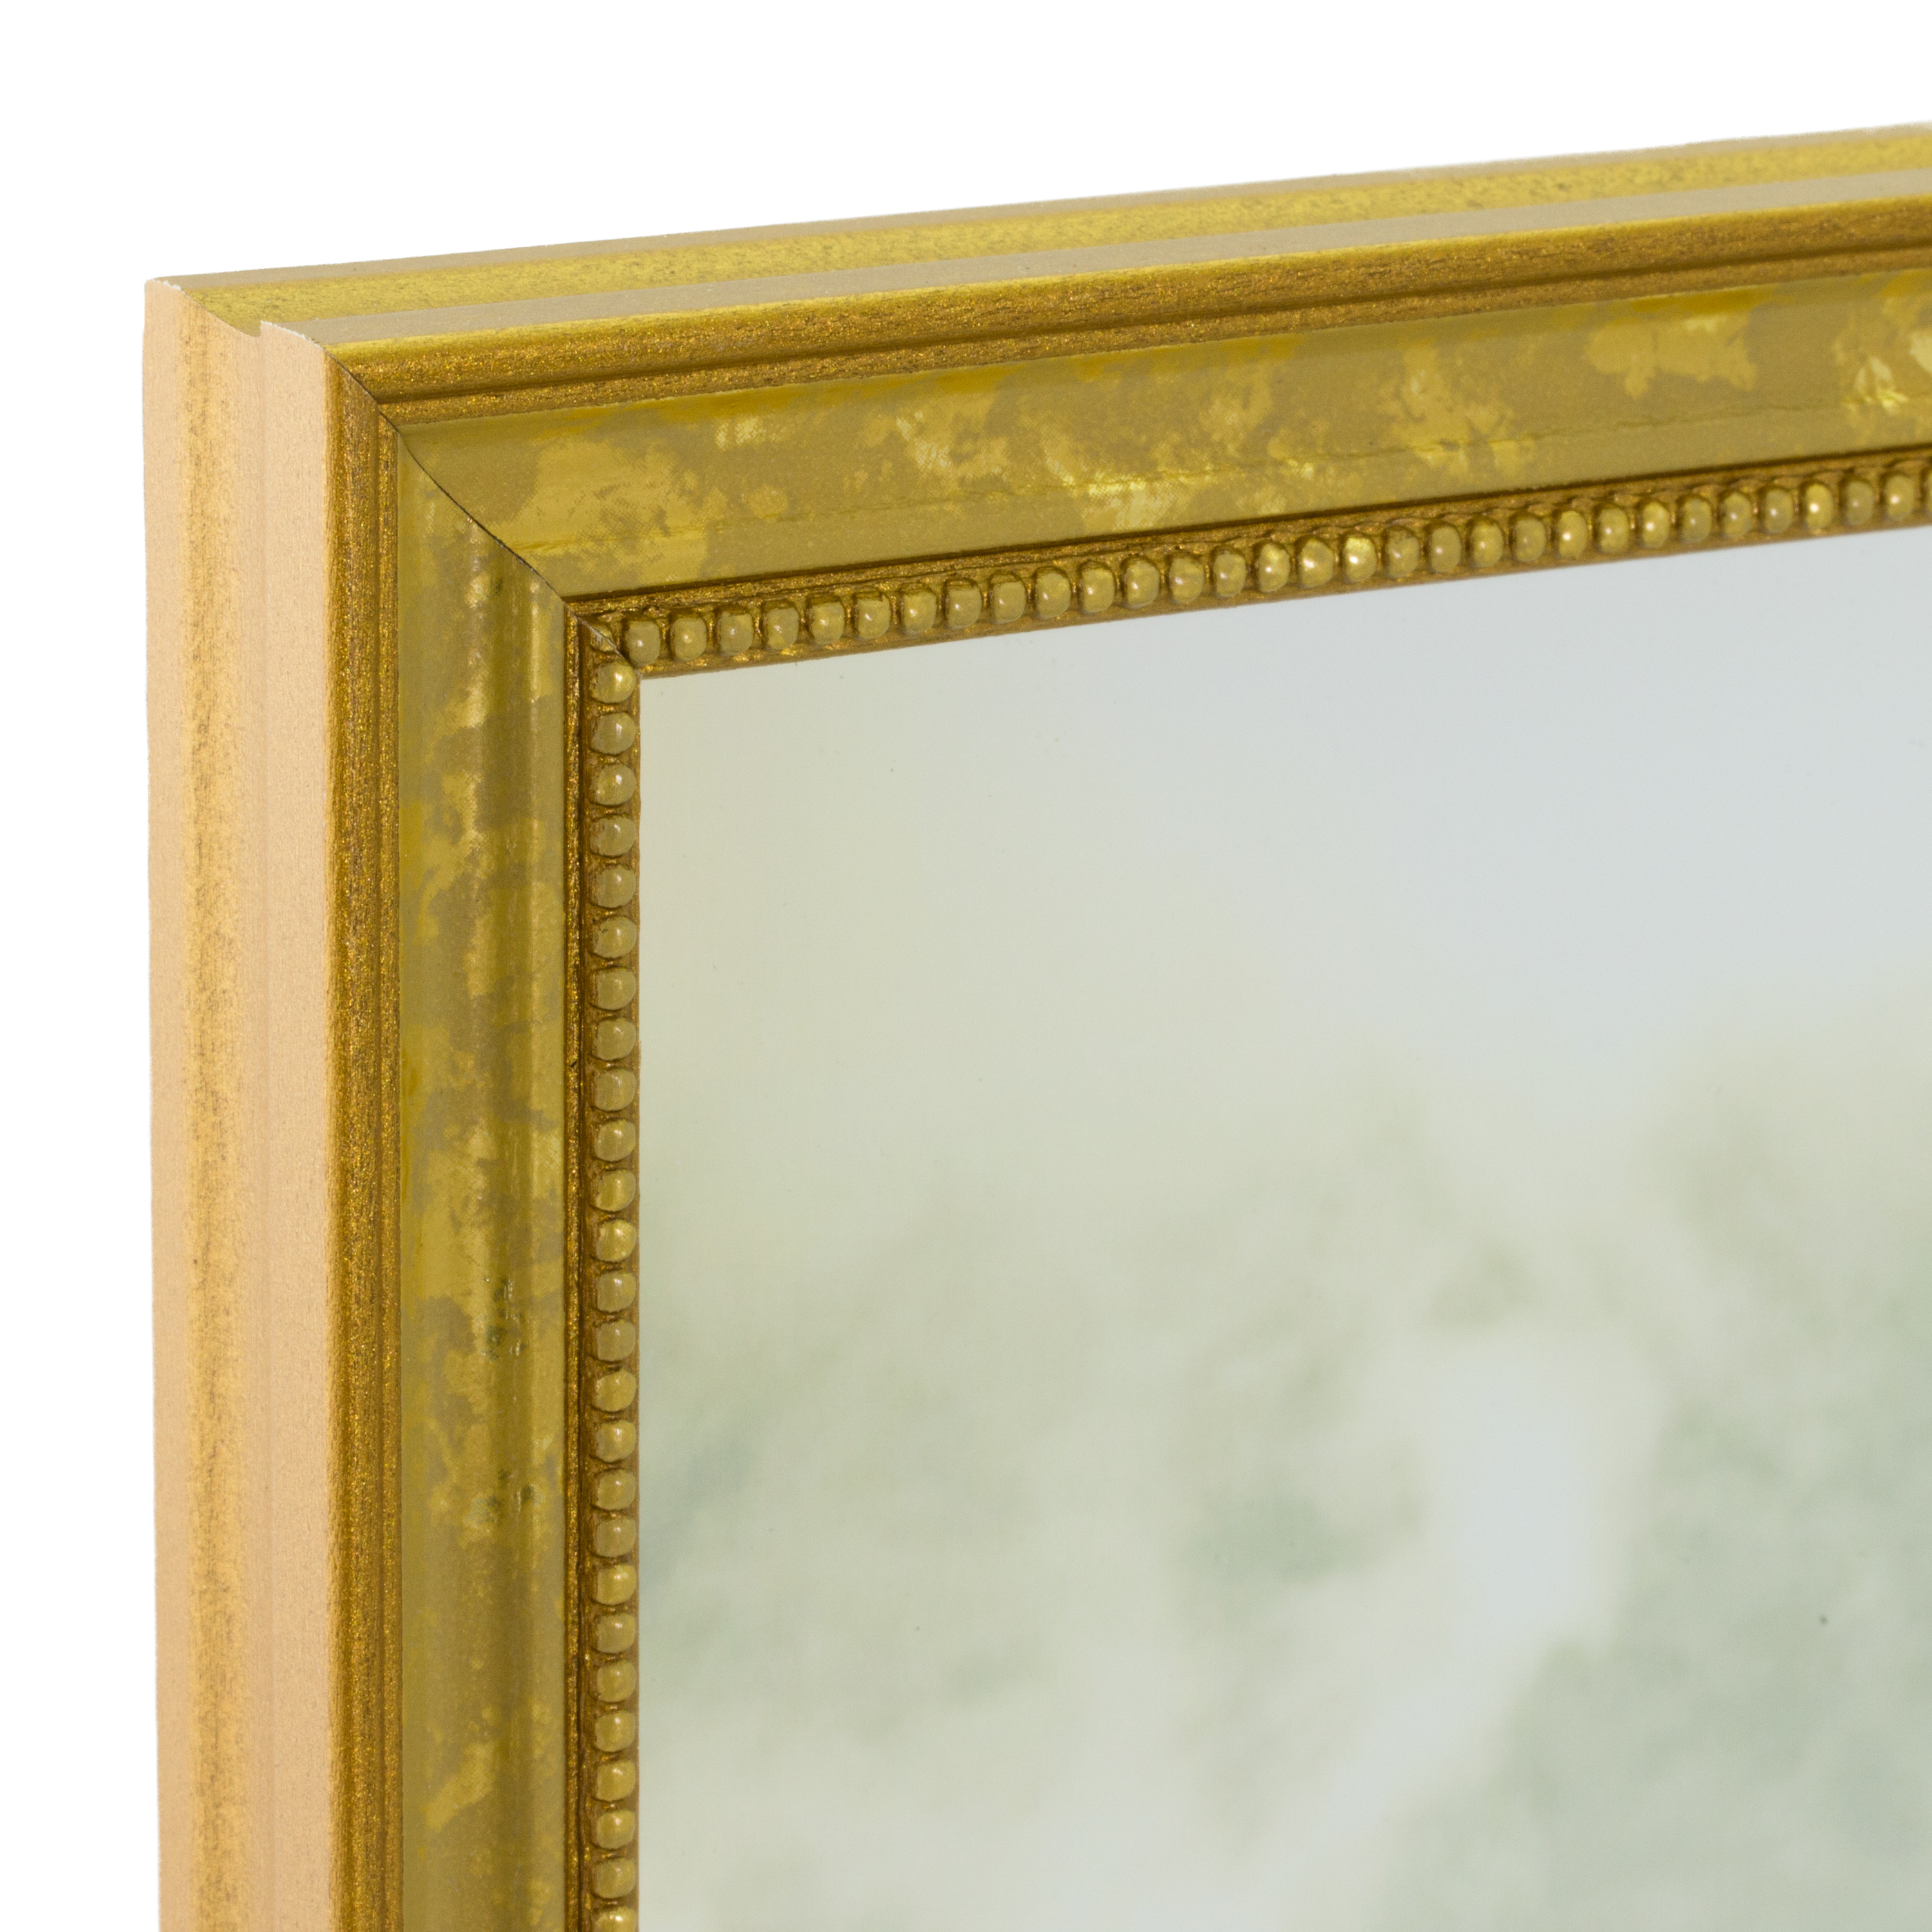 5x5 Inch Stratton .75 Wide Craig Frames 314GD0505 Aged Gold Picture Frame